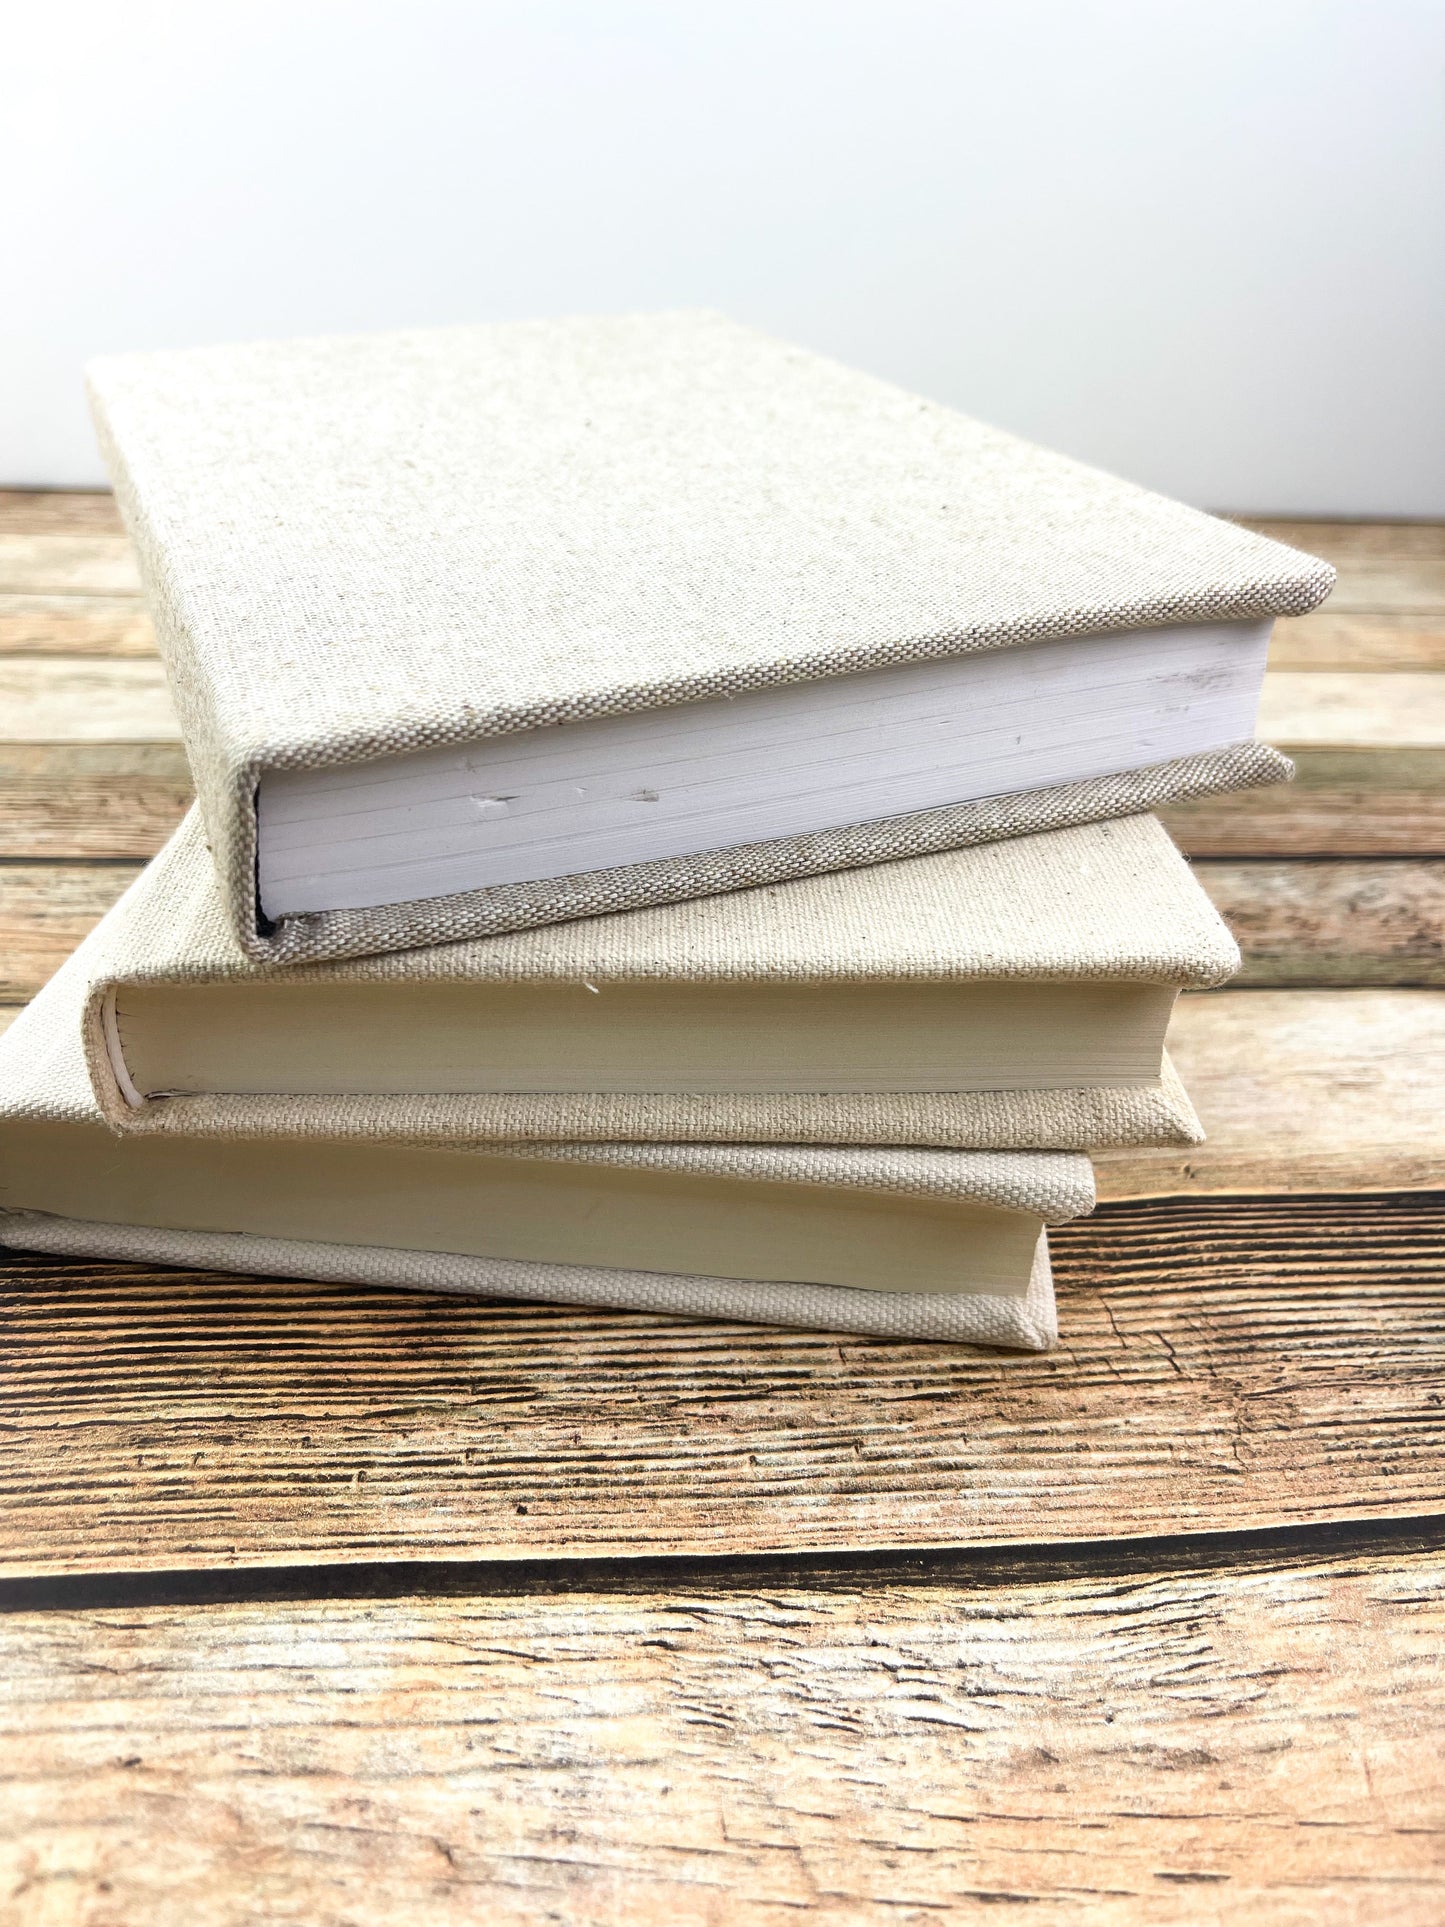 Neutral Blemished Books (Set of Five) - Varied Imperfections